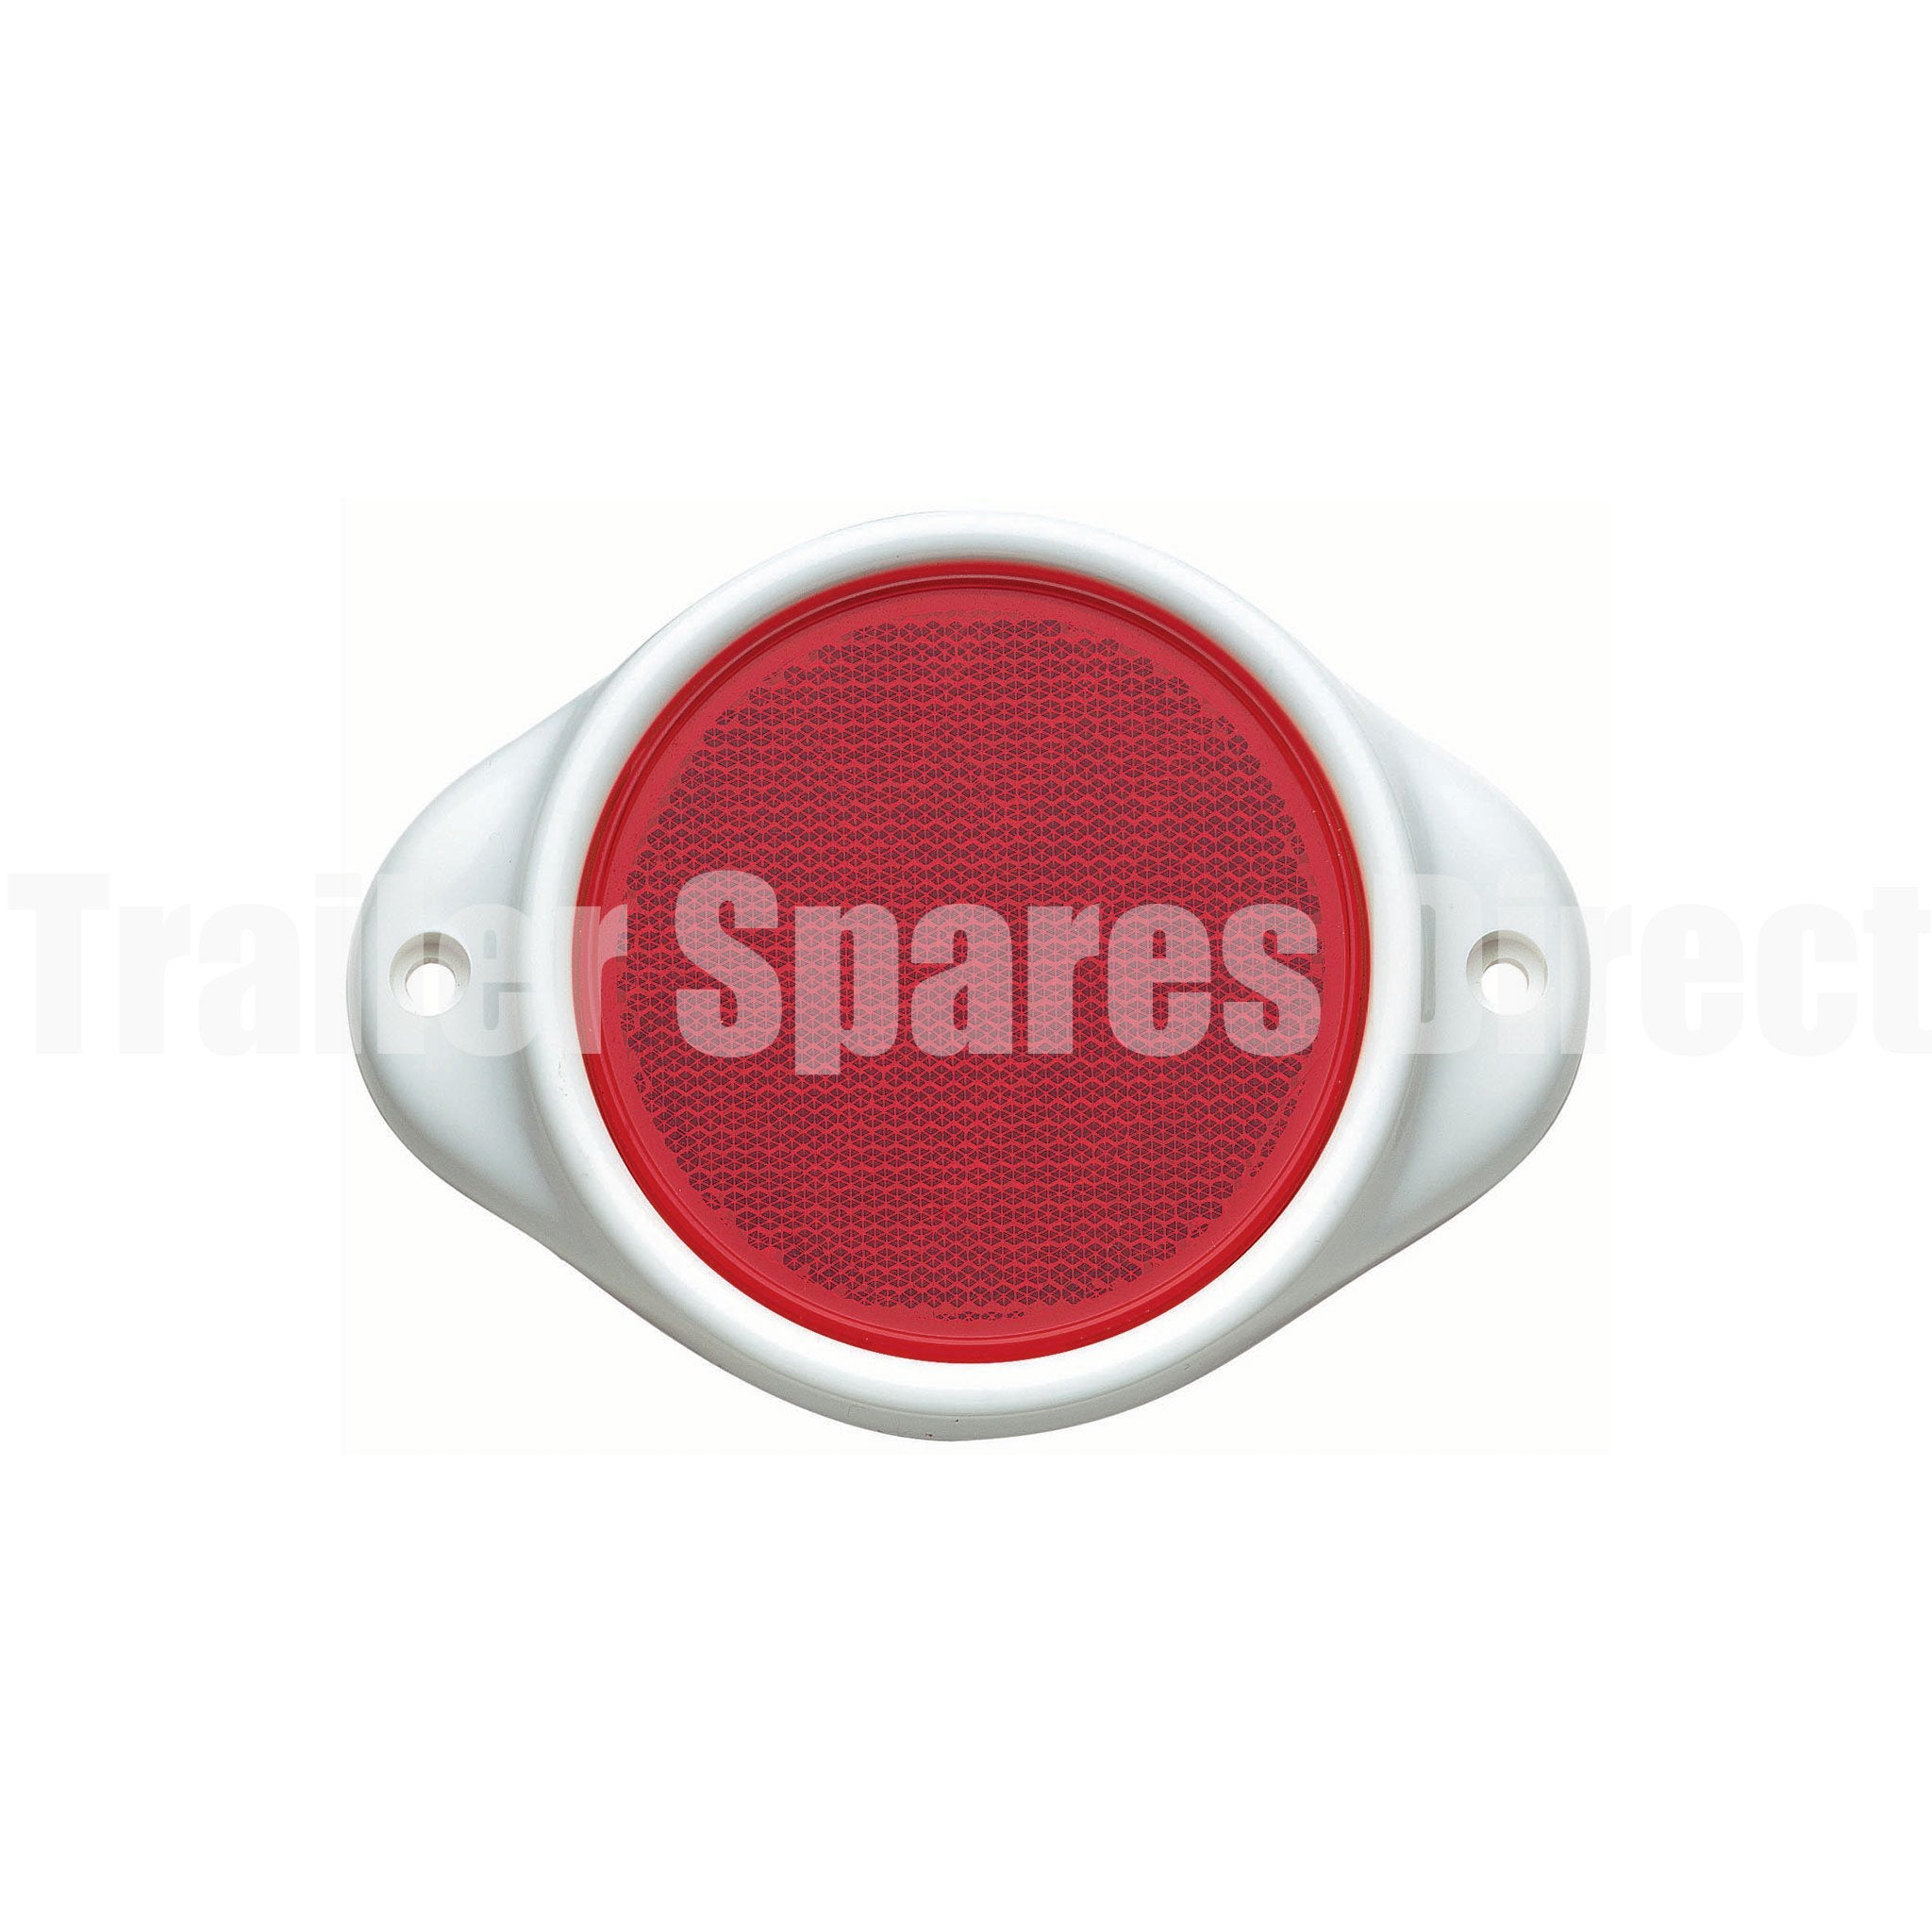 84082 - Narva red reflector in white plastic screw mount housing. 